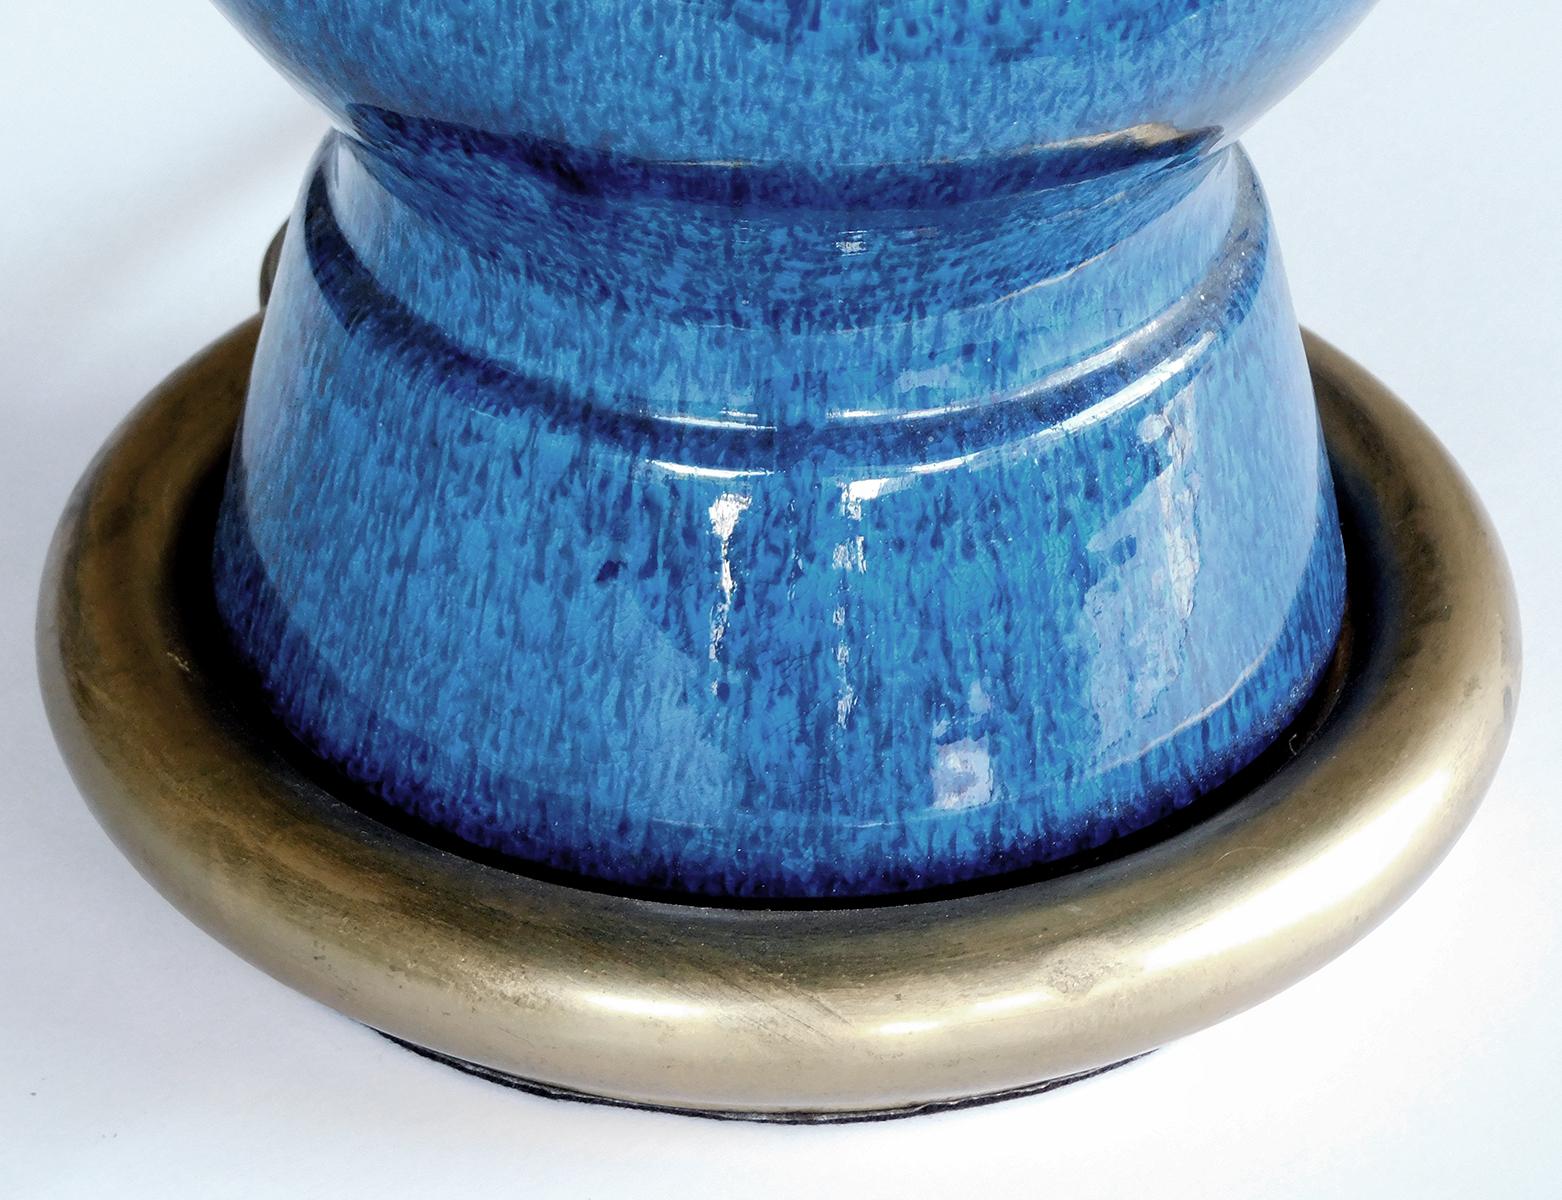 with waisted brass collar above a double-baluster ceramic body all in a richly-colored sapphire-blue drip glaze.